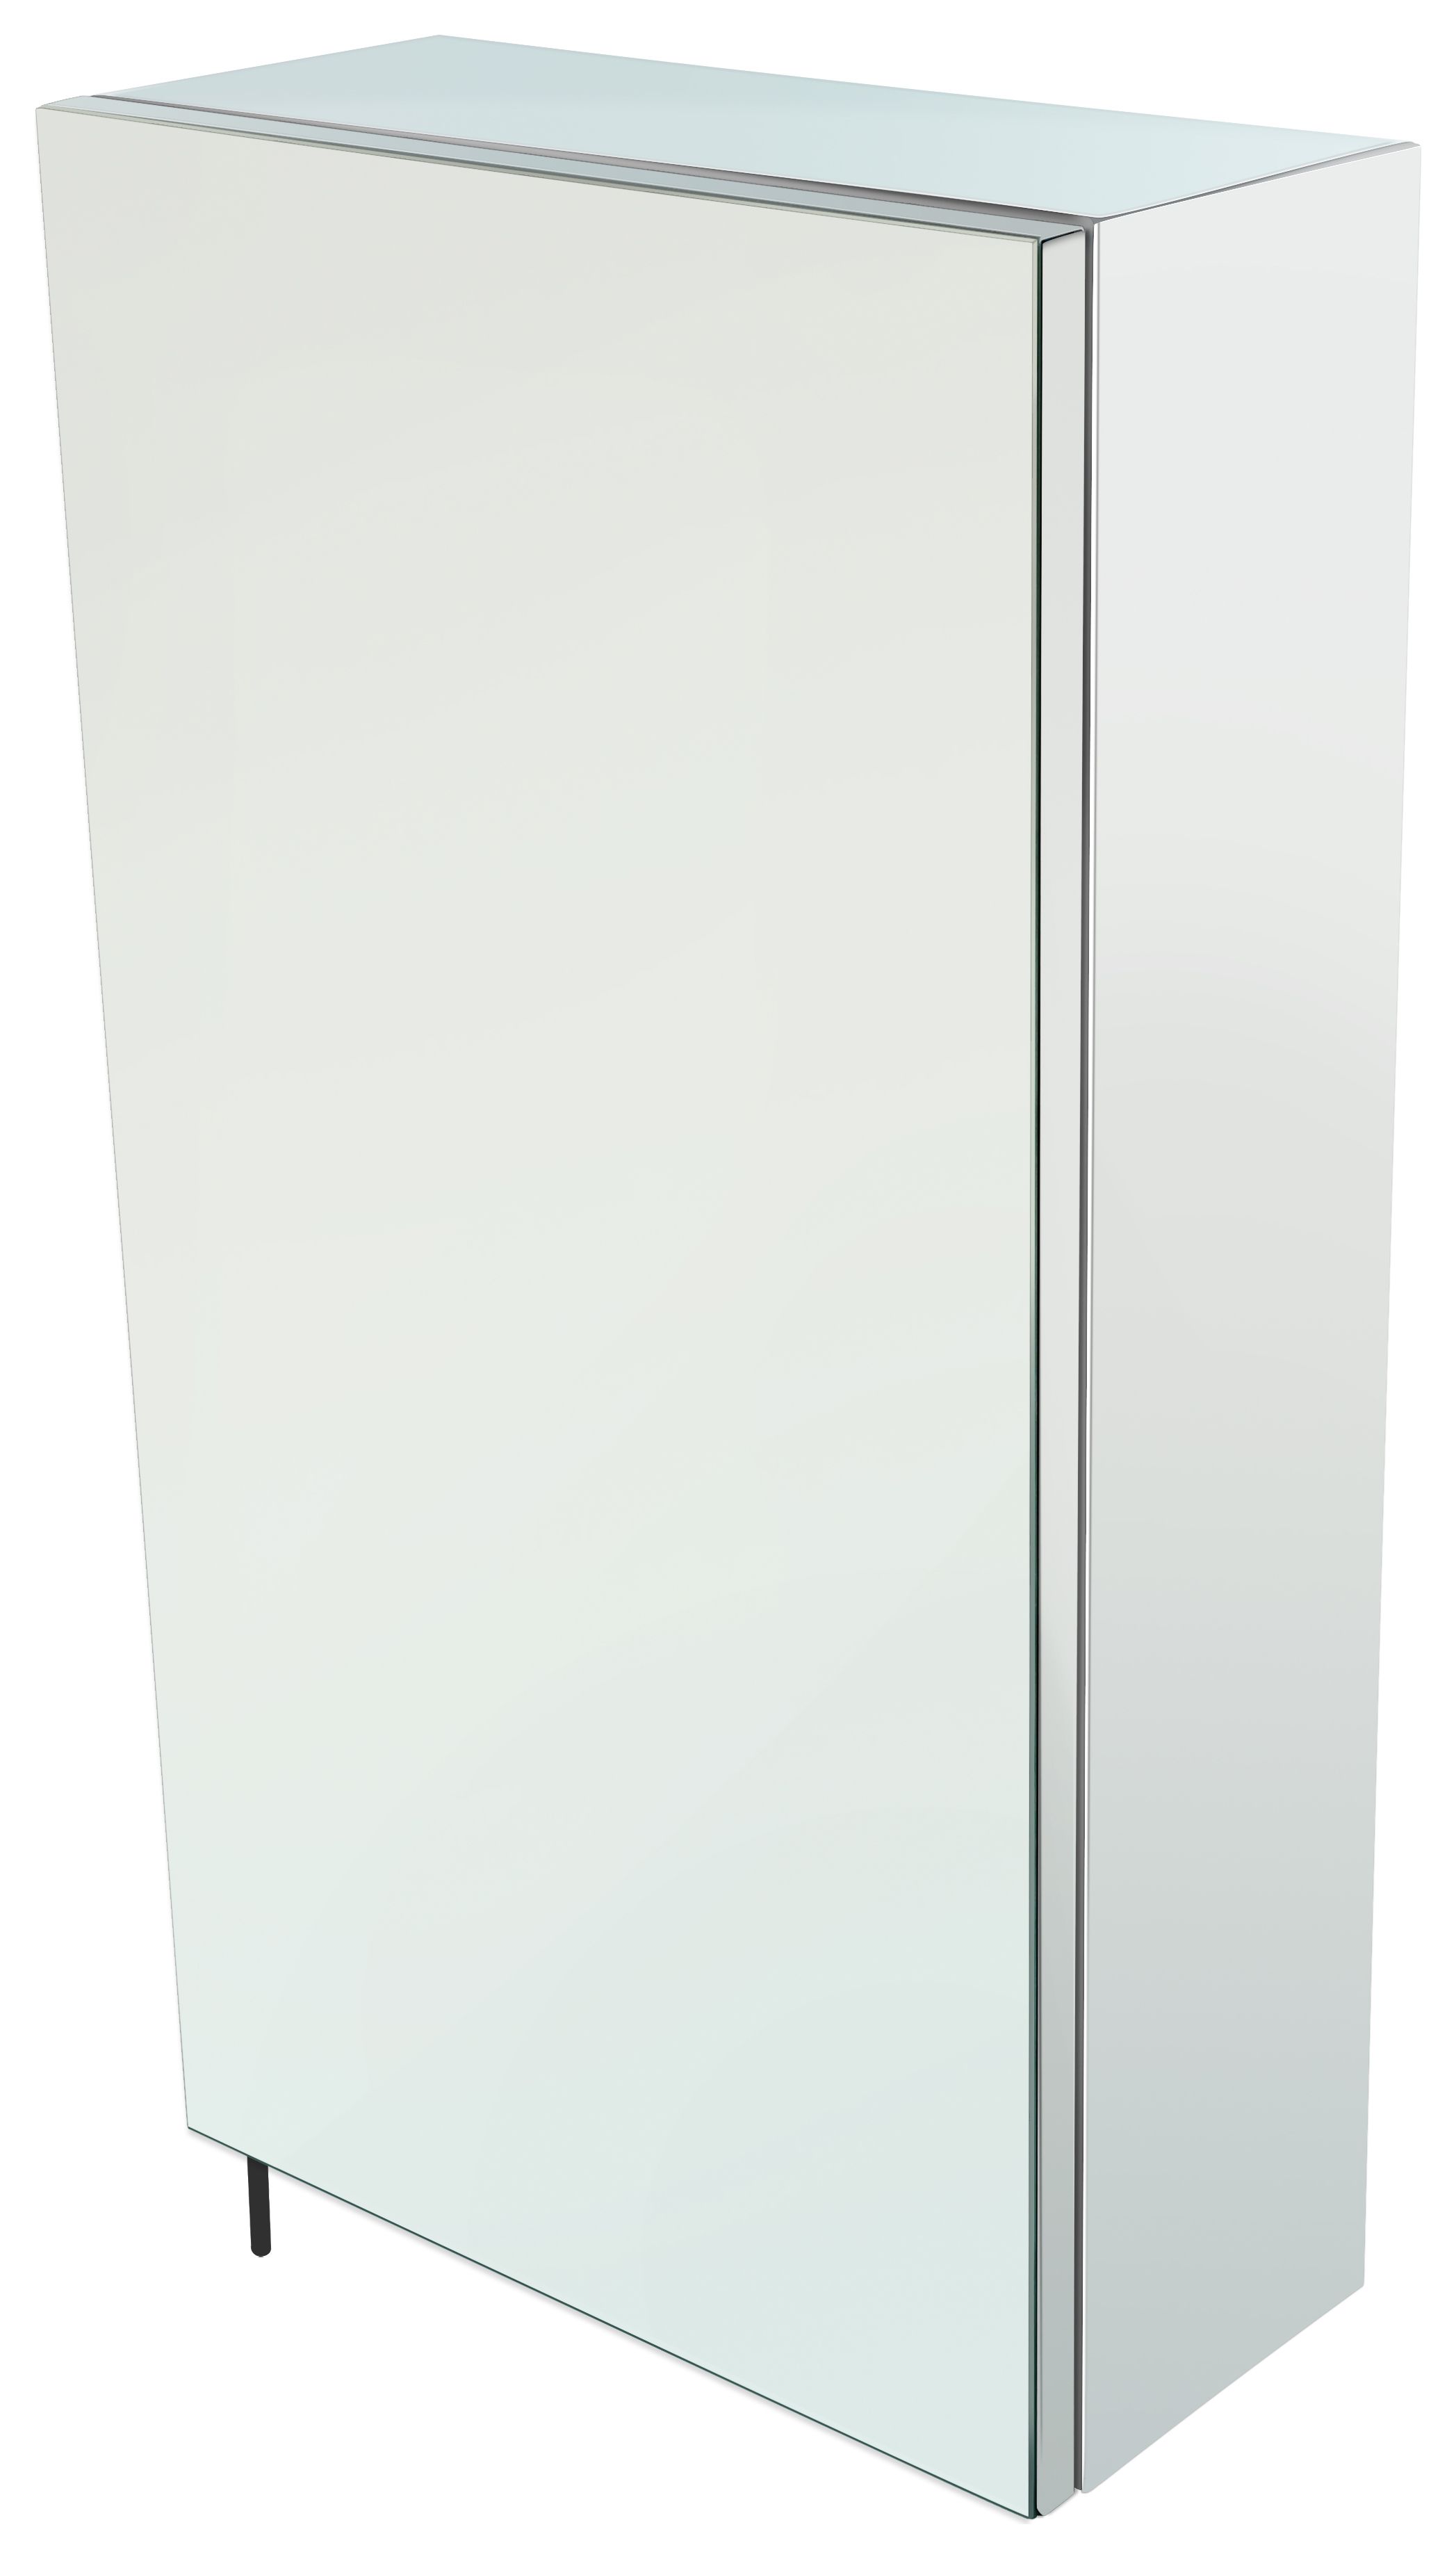 Image of Wickes Stainless Steel Single Bathroom Cabinet - 550 x 300mm